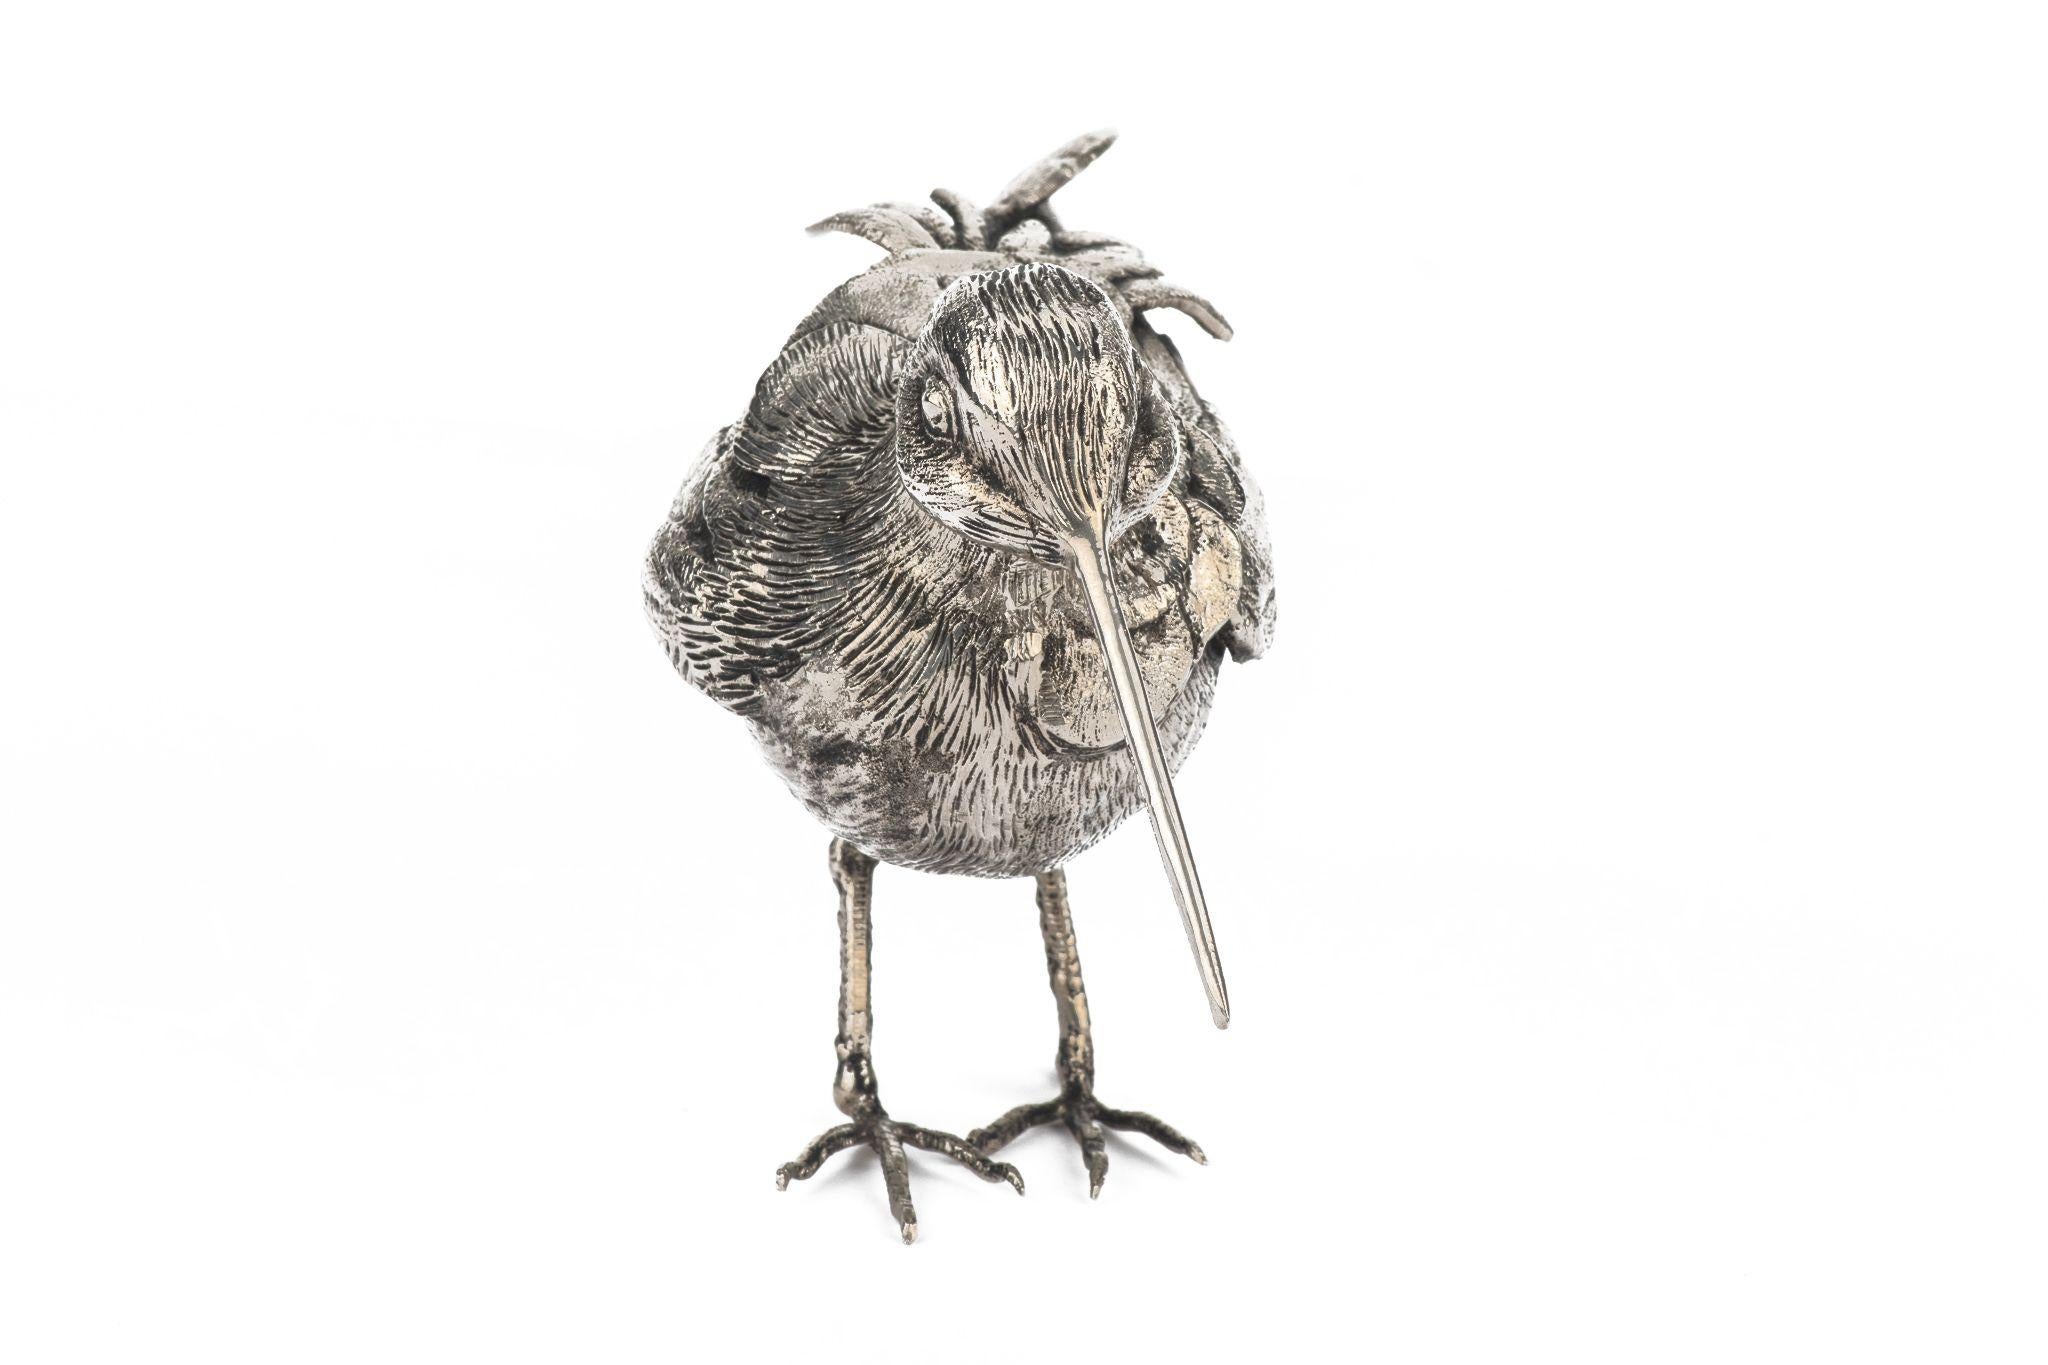 Gucci 1970's collectible woodcock in silver tone metal. Substantial weight and magnificent artifacts, great decorative piece. Excellent condition.